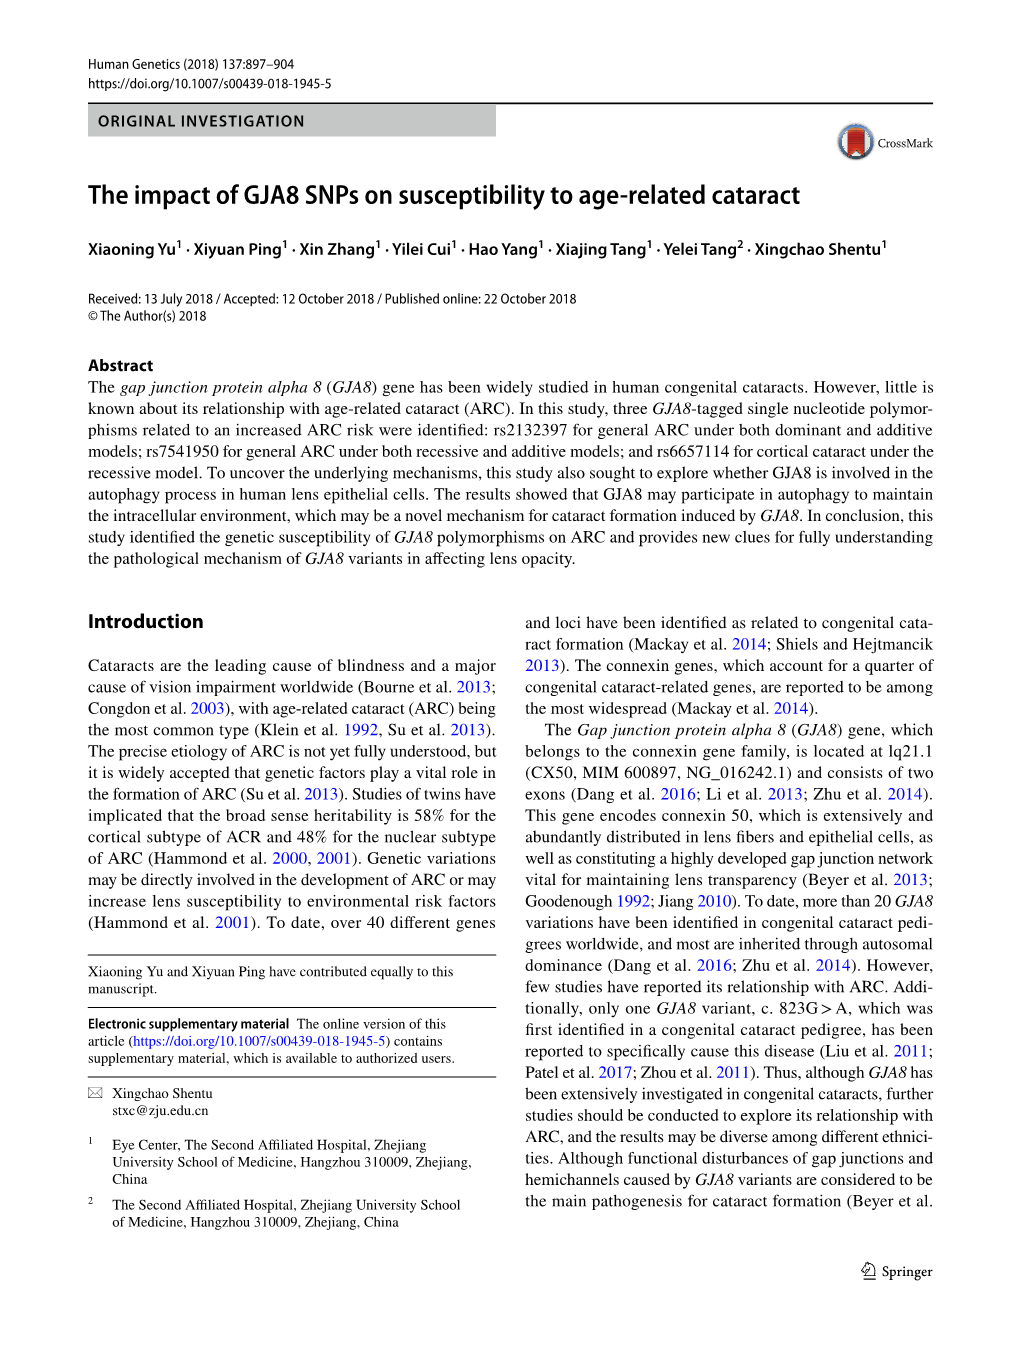 The Impact of GJA8 Snps on Susceptibility to Age-Related Cataract